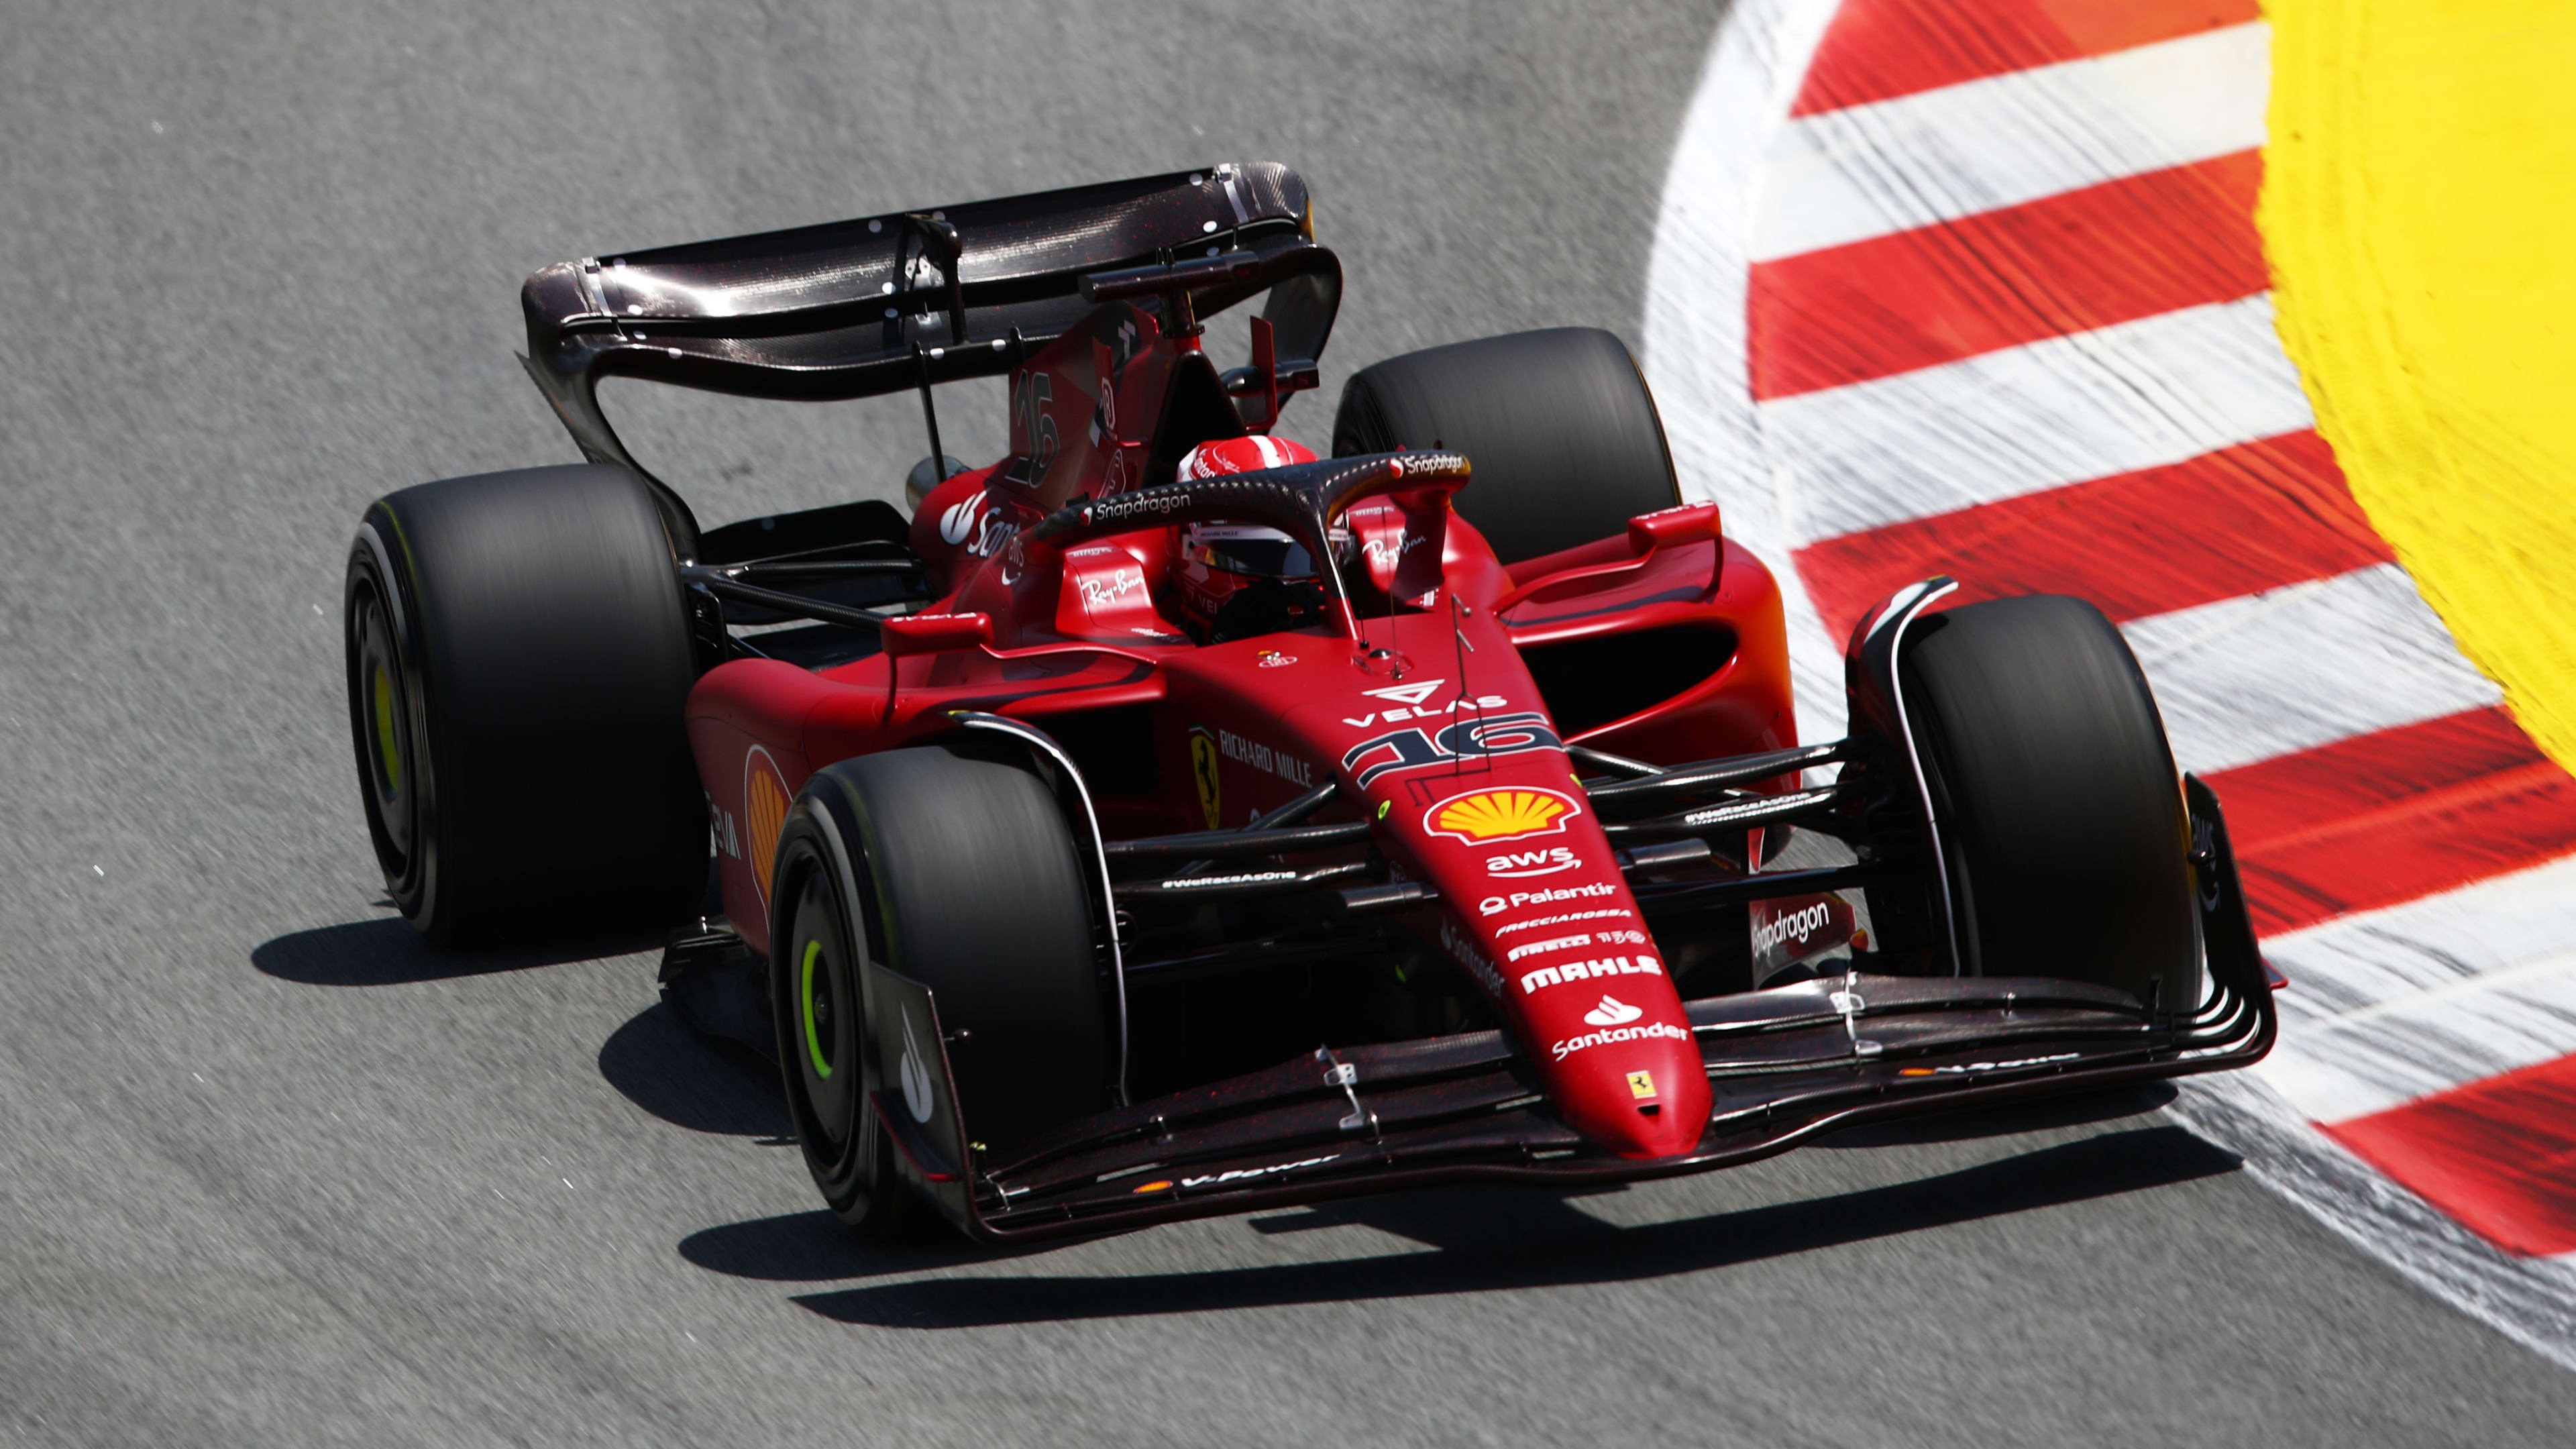 2022 Spanish Grand Prix FP1 report and highlights Leclerc leads Sainz and Verstappen as Ferrari begin Spanish GP weekend on the front foot Formula 1 ®